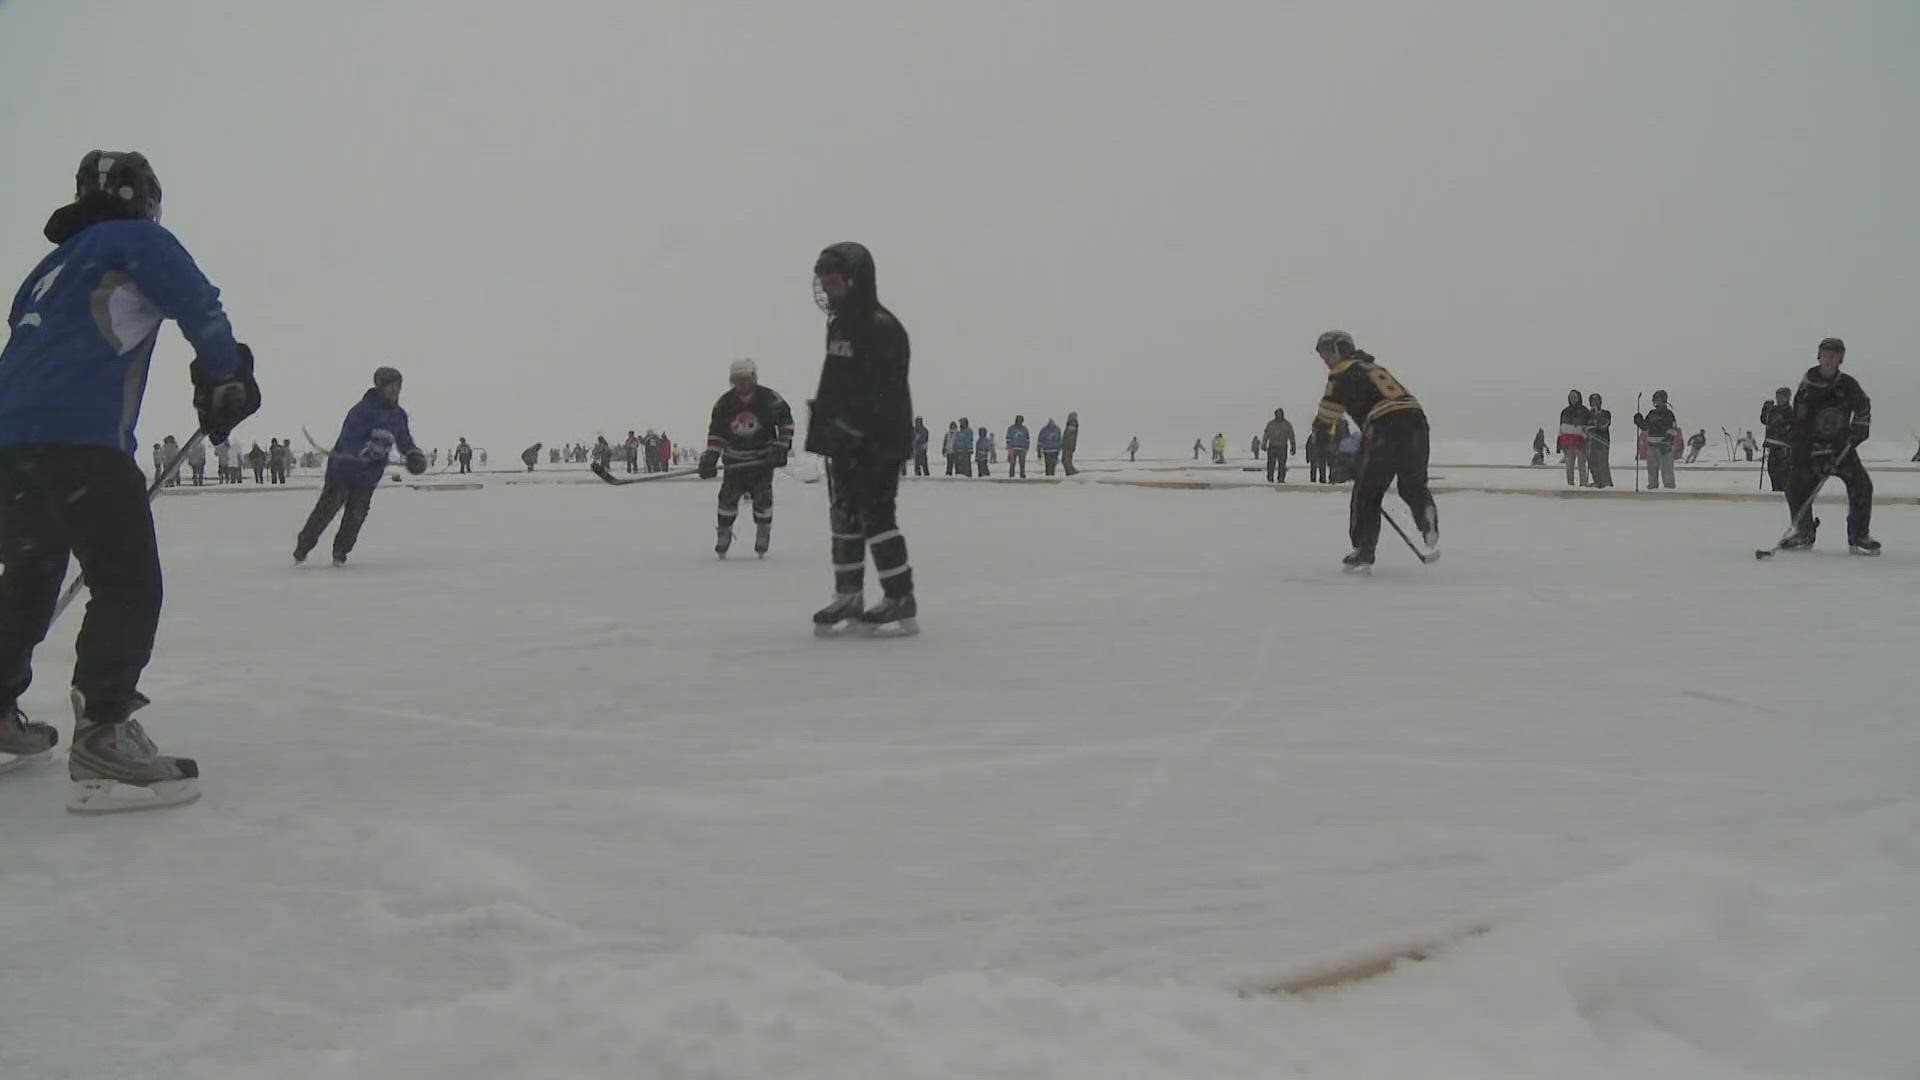 The Maine pond Hockey Classic has been postponed to Feb. 10, due to the expected cold temperatures. Teams can still register this week.